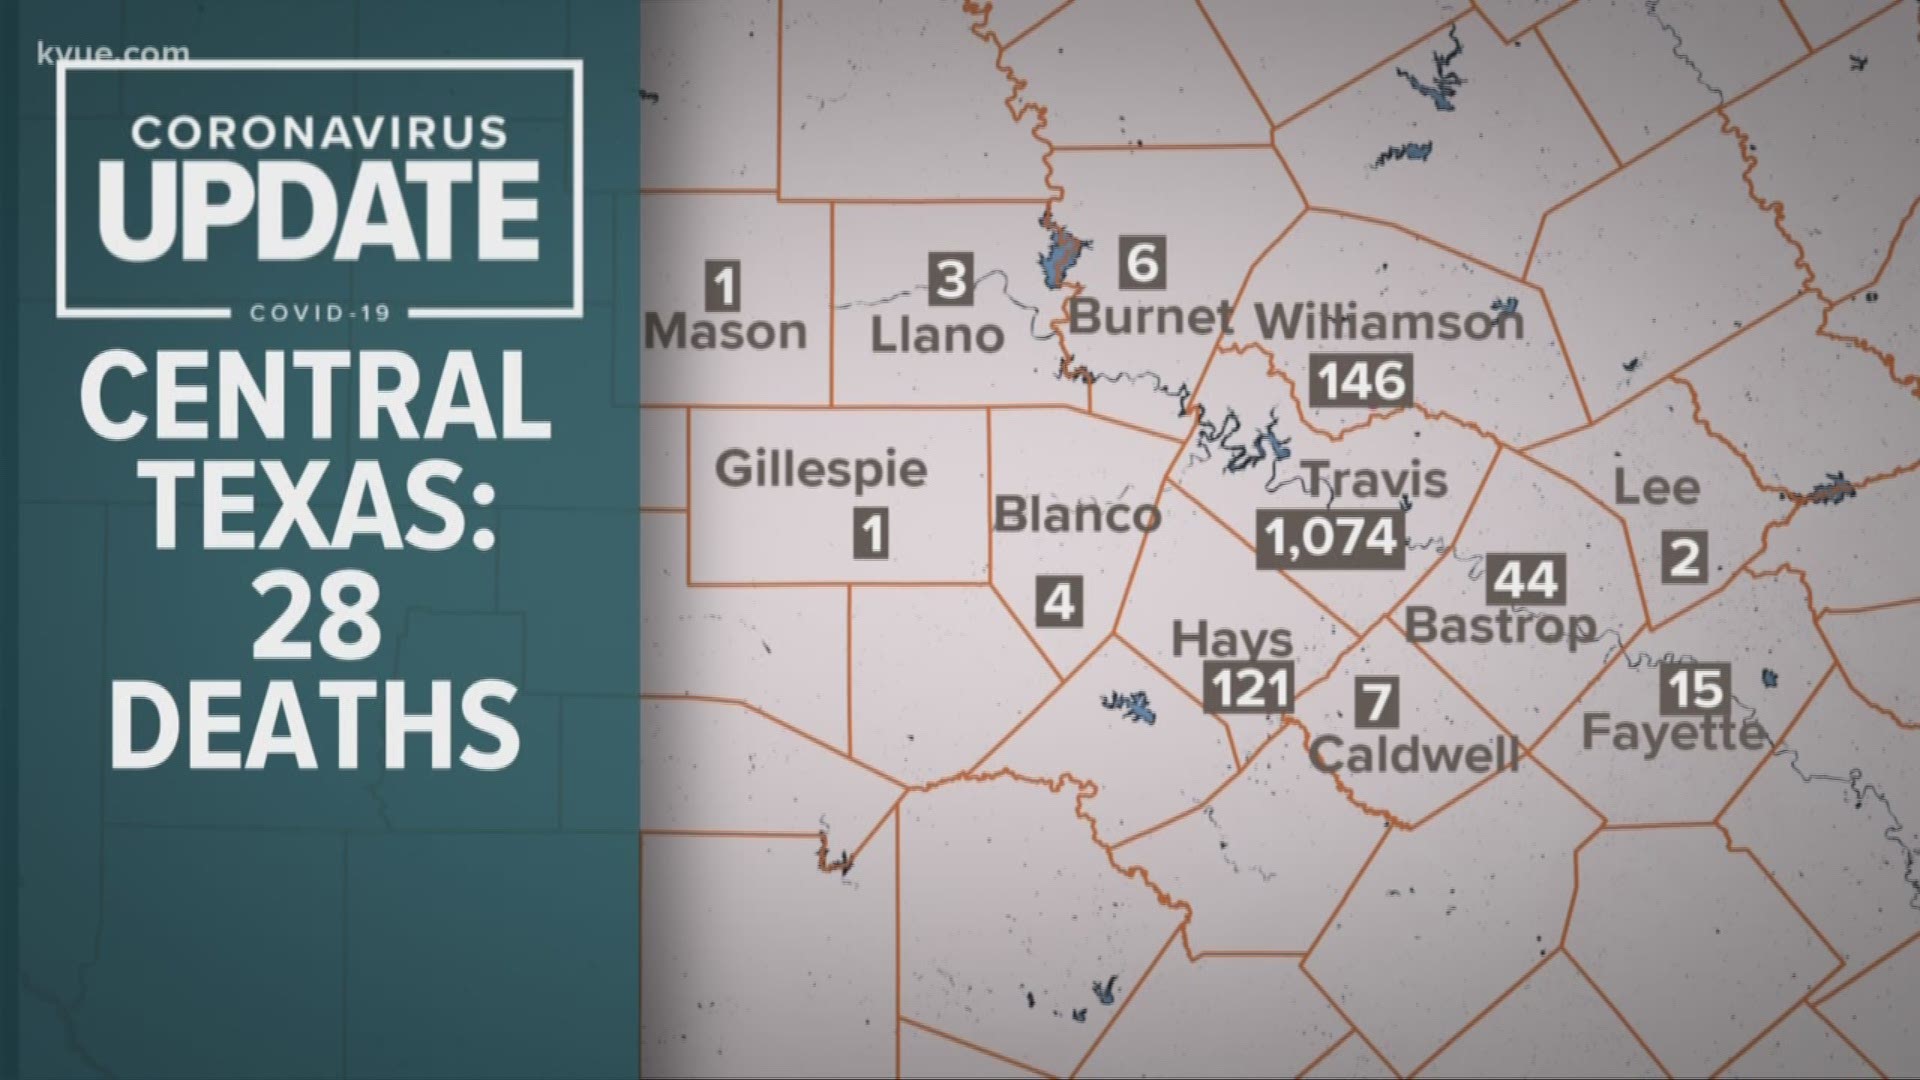 There have been at least 28 deaths from the virus in Central Texas.